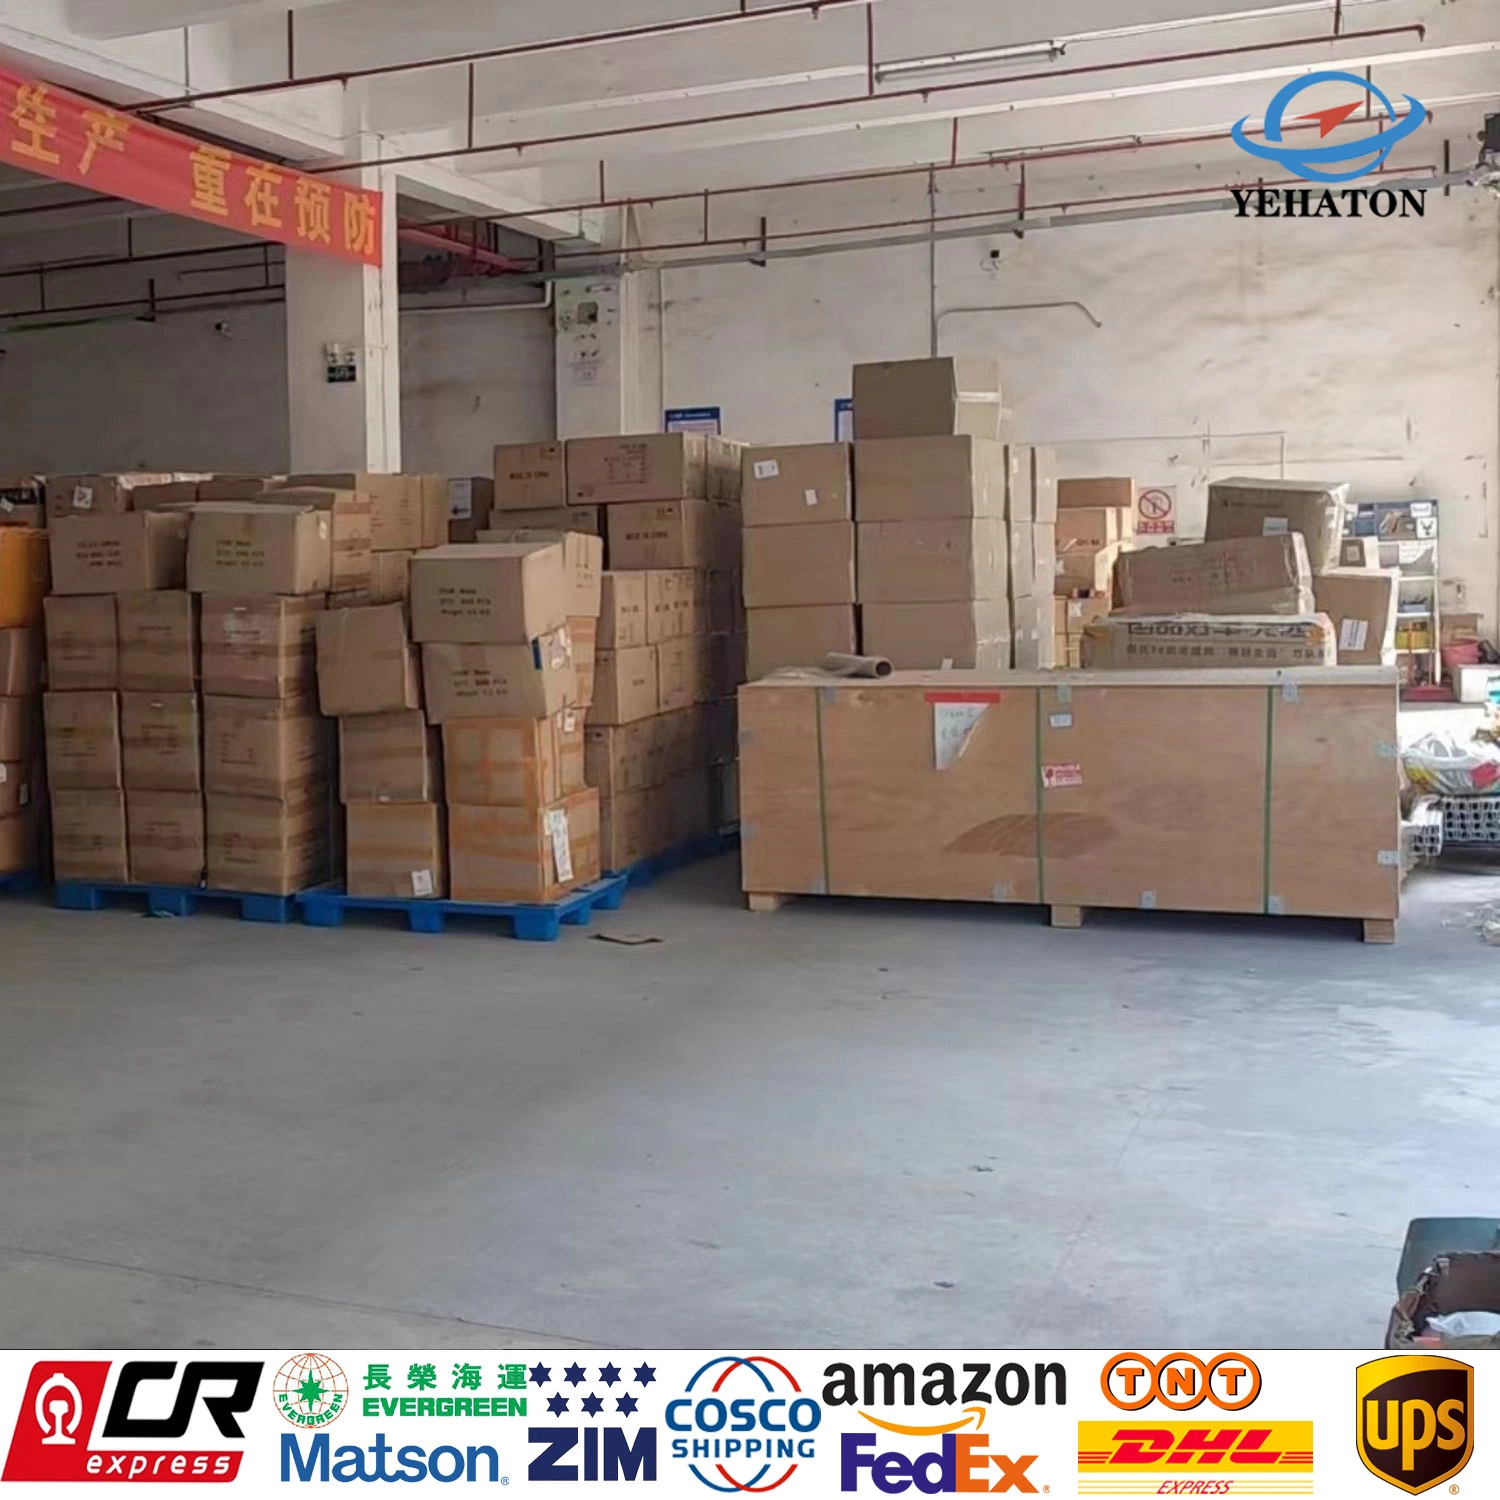 Fast Railway Train Freight Forwarder Combined Transport Shipping Agent UPS FedEx DHL Door to Door From China to UK France Germany USA Amazon Fba